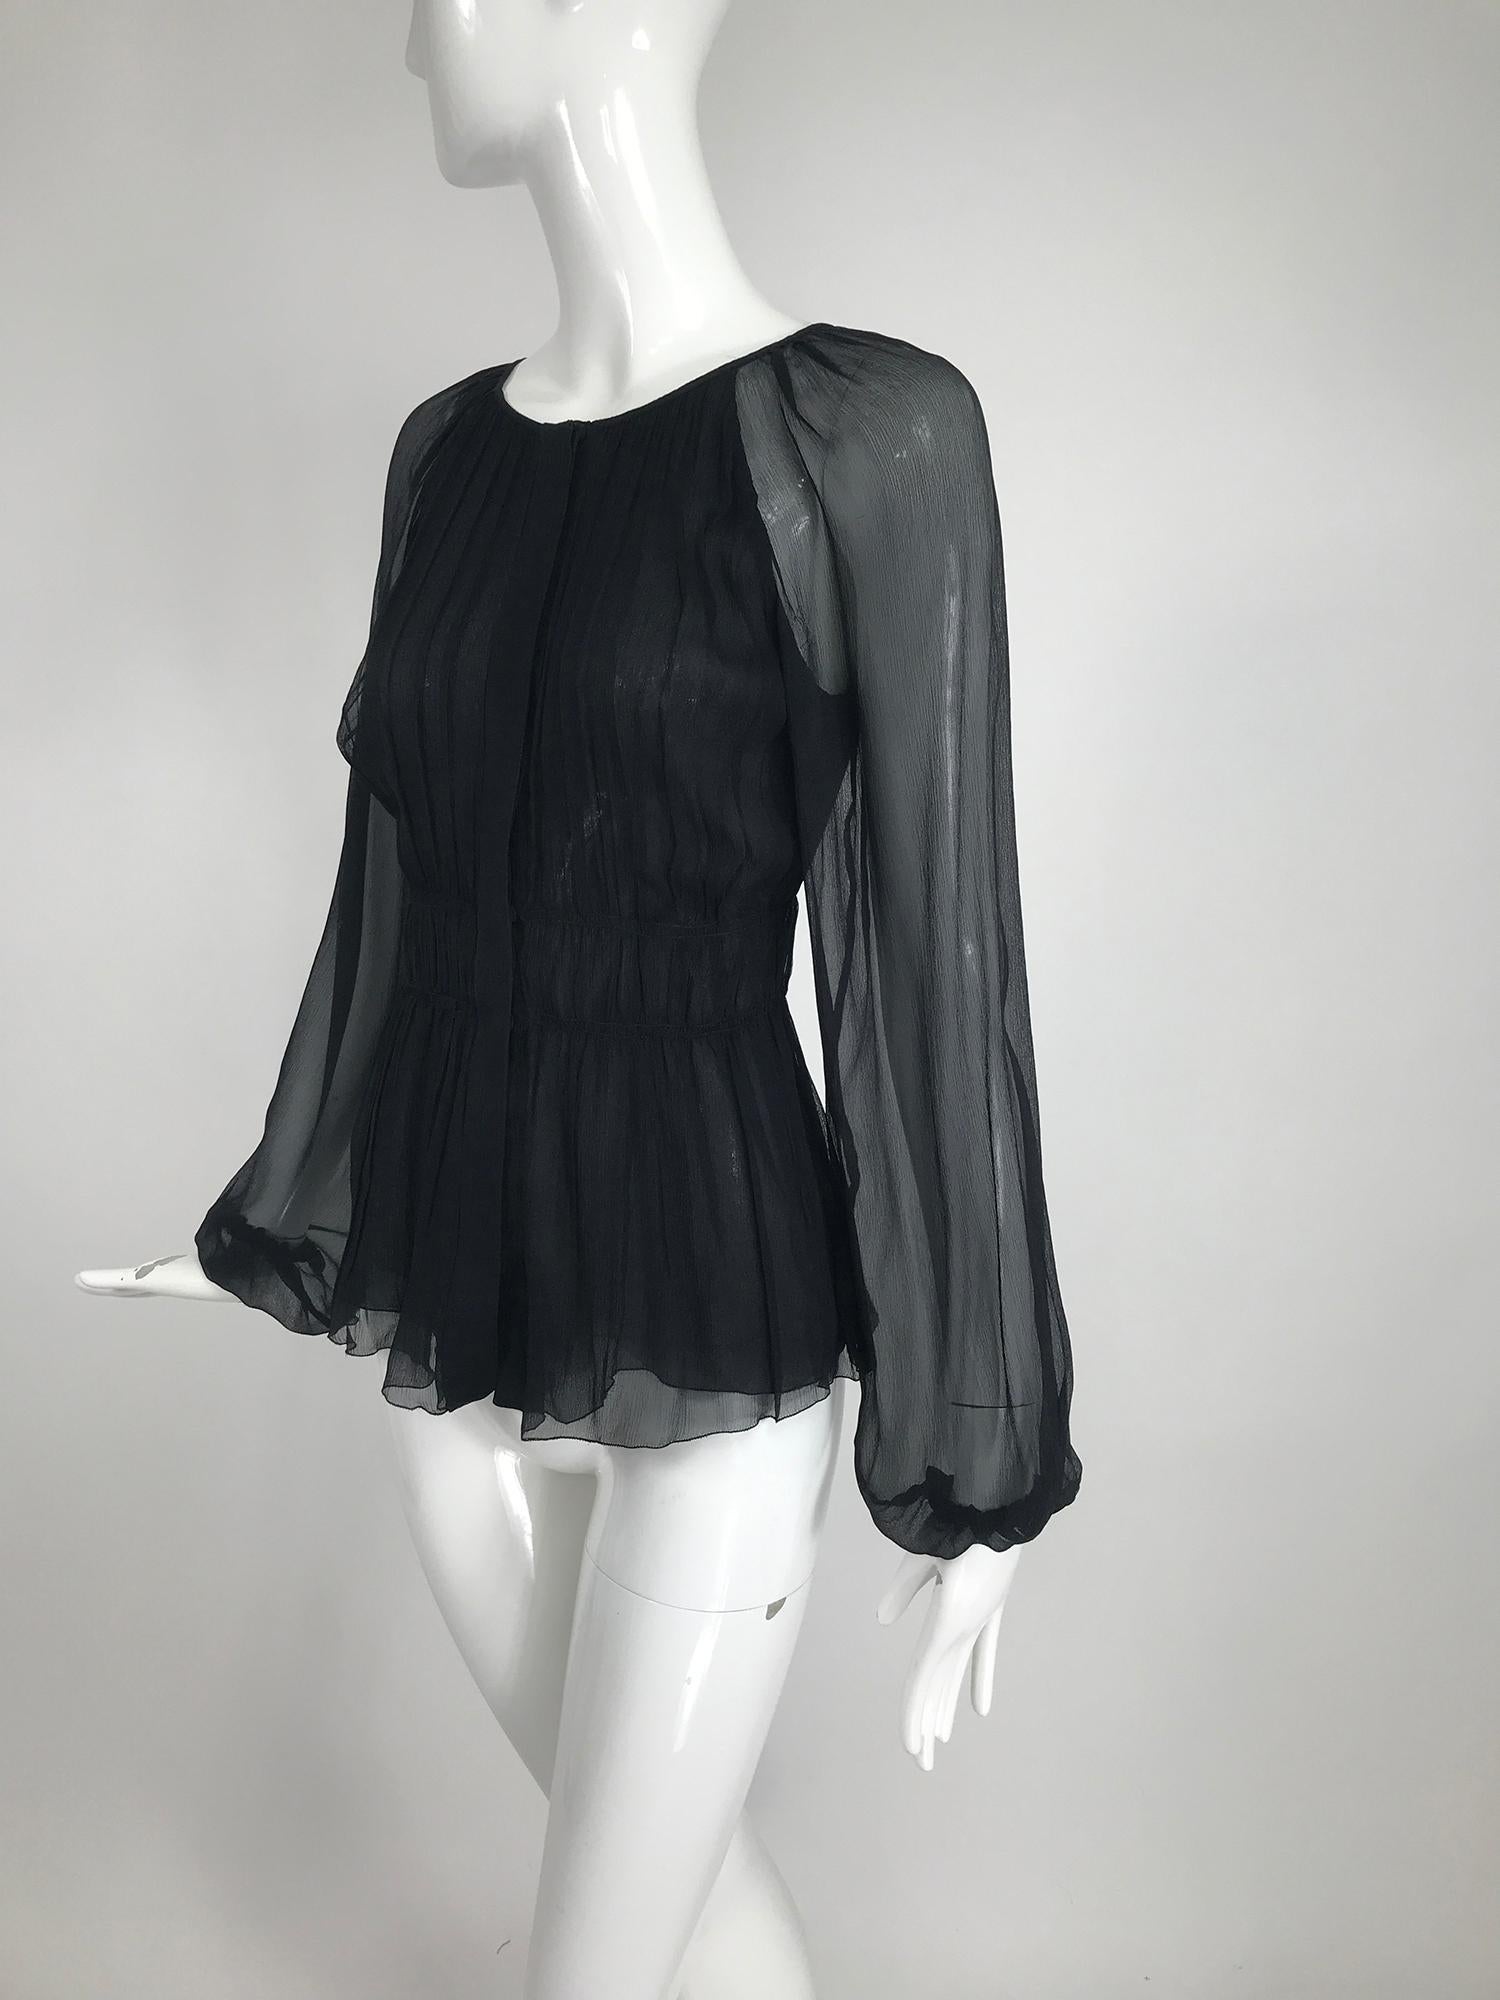 Prada sheer black silk chiffon jewel neck, blouse with a pleated gathered fitted torso and double narrow band waist. Long raglan sleeves are full and have cased elastic cuffs. The blouse closes at the front with buttons and hidden snaps. Blouse is